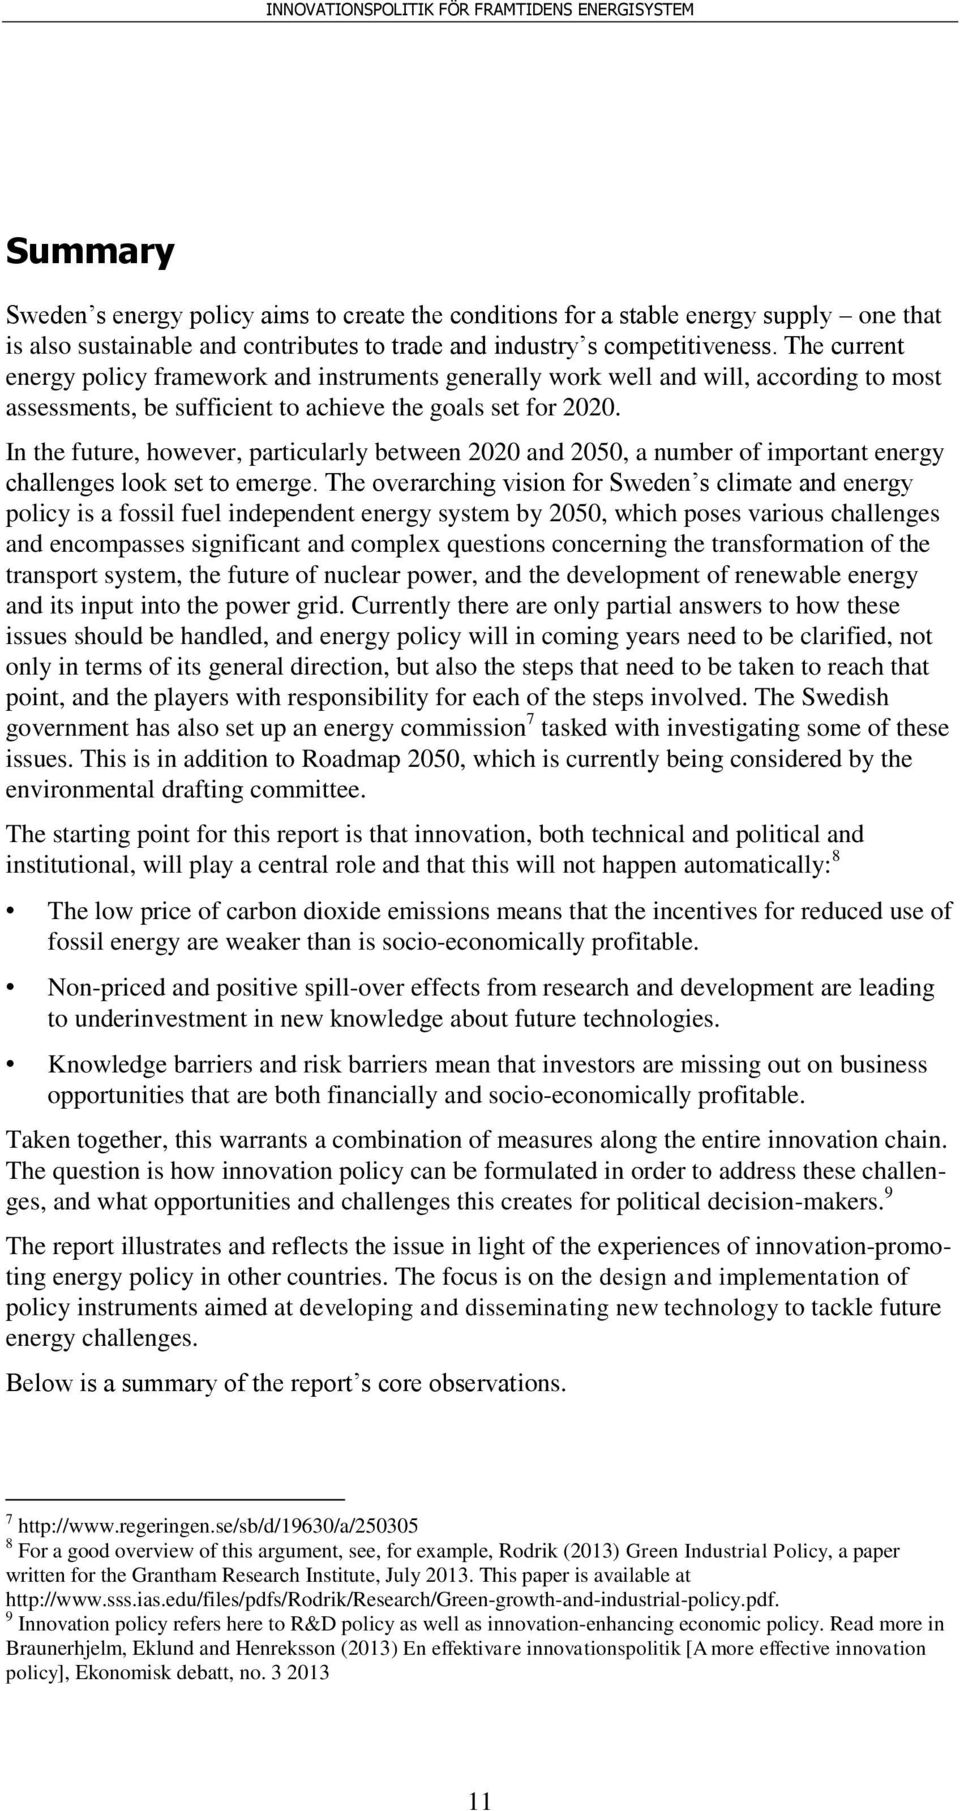 In the future, however, particularly between 2020 and 2050, a number of important energy challenges look set to emerge.